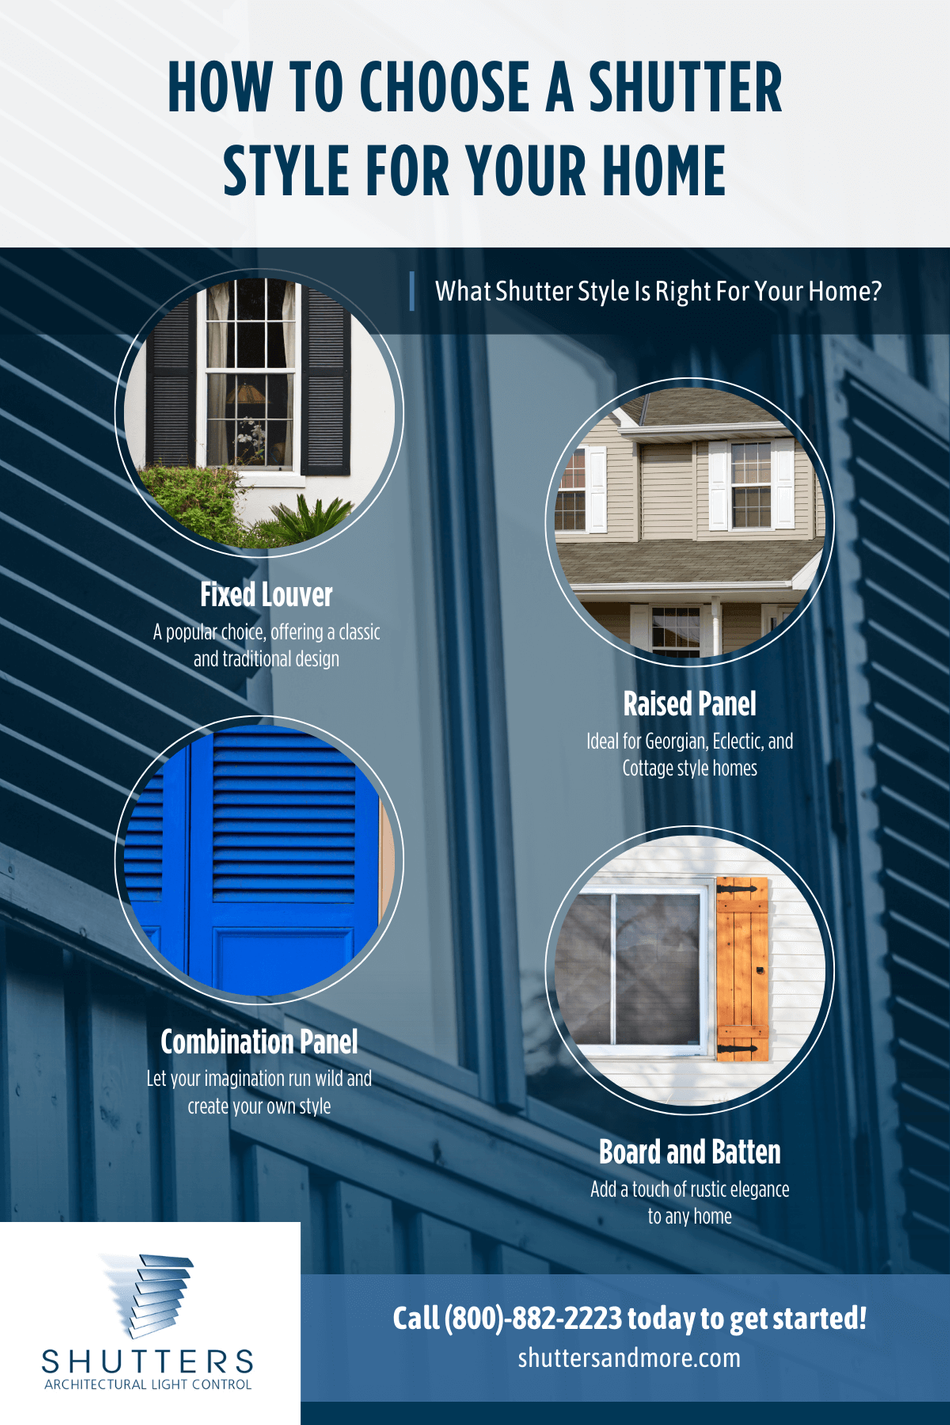 How To Choose A Shutter Style For Your Home Infographic